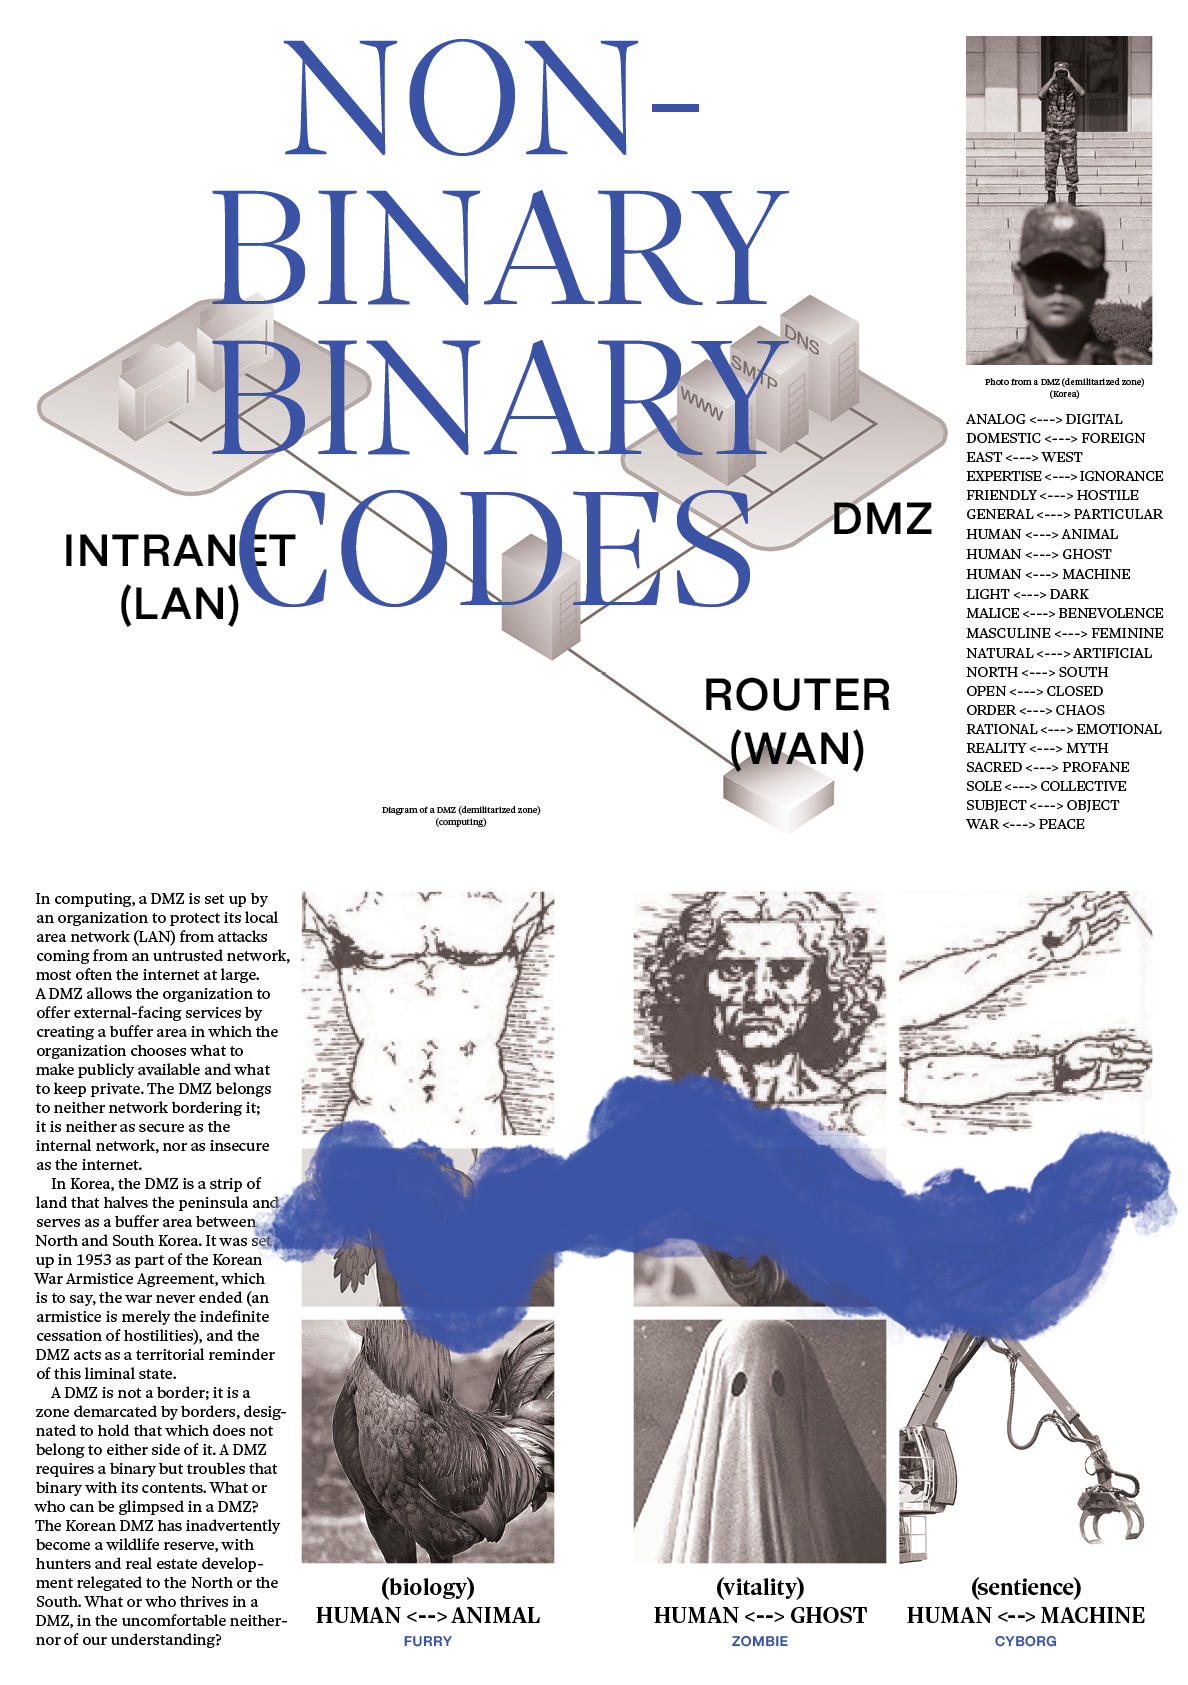 poster on different types of binary oppositions